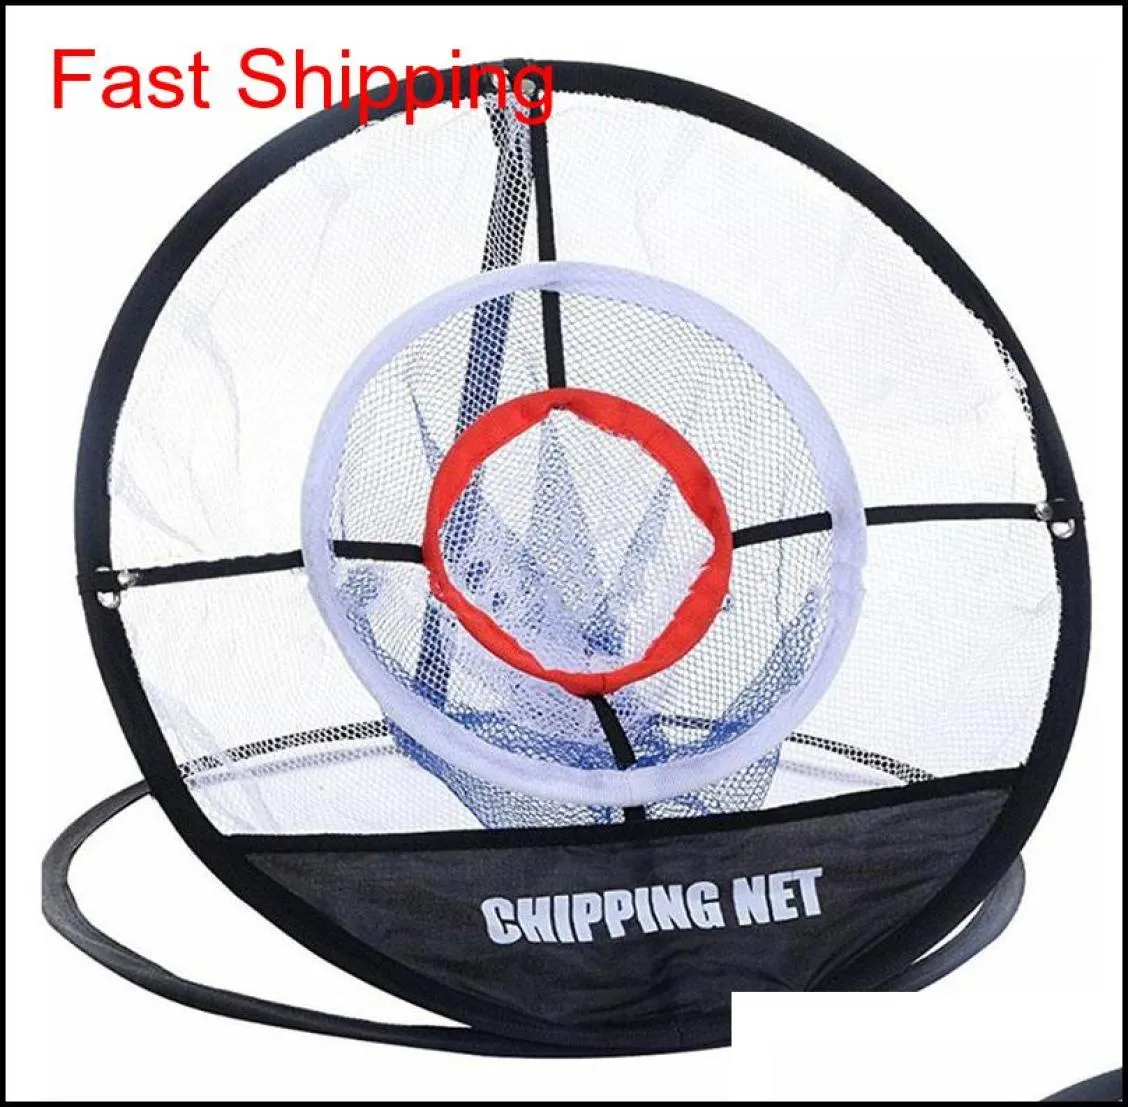 Golf Up Indoor Outdoor Chipping Pitching Cages Mats Practice Easy Net Golf Training Aids Metal Net H7Lof A3Rg1 N1Ujc Cxpkj Mwzjd5964031